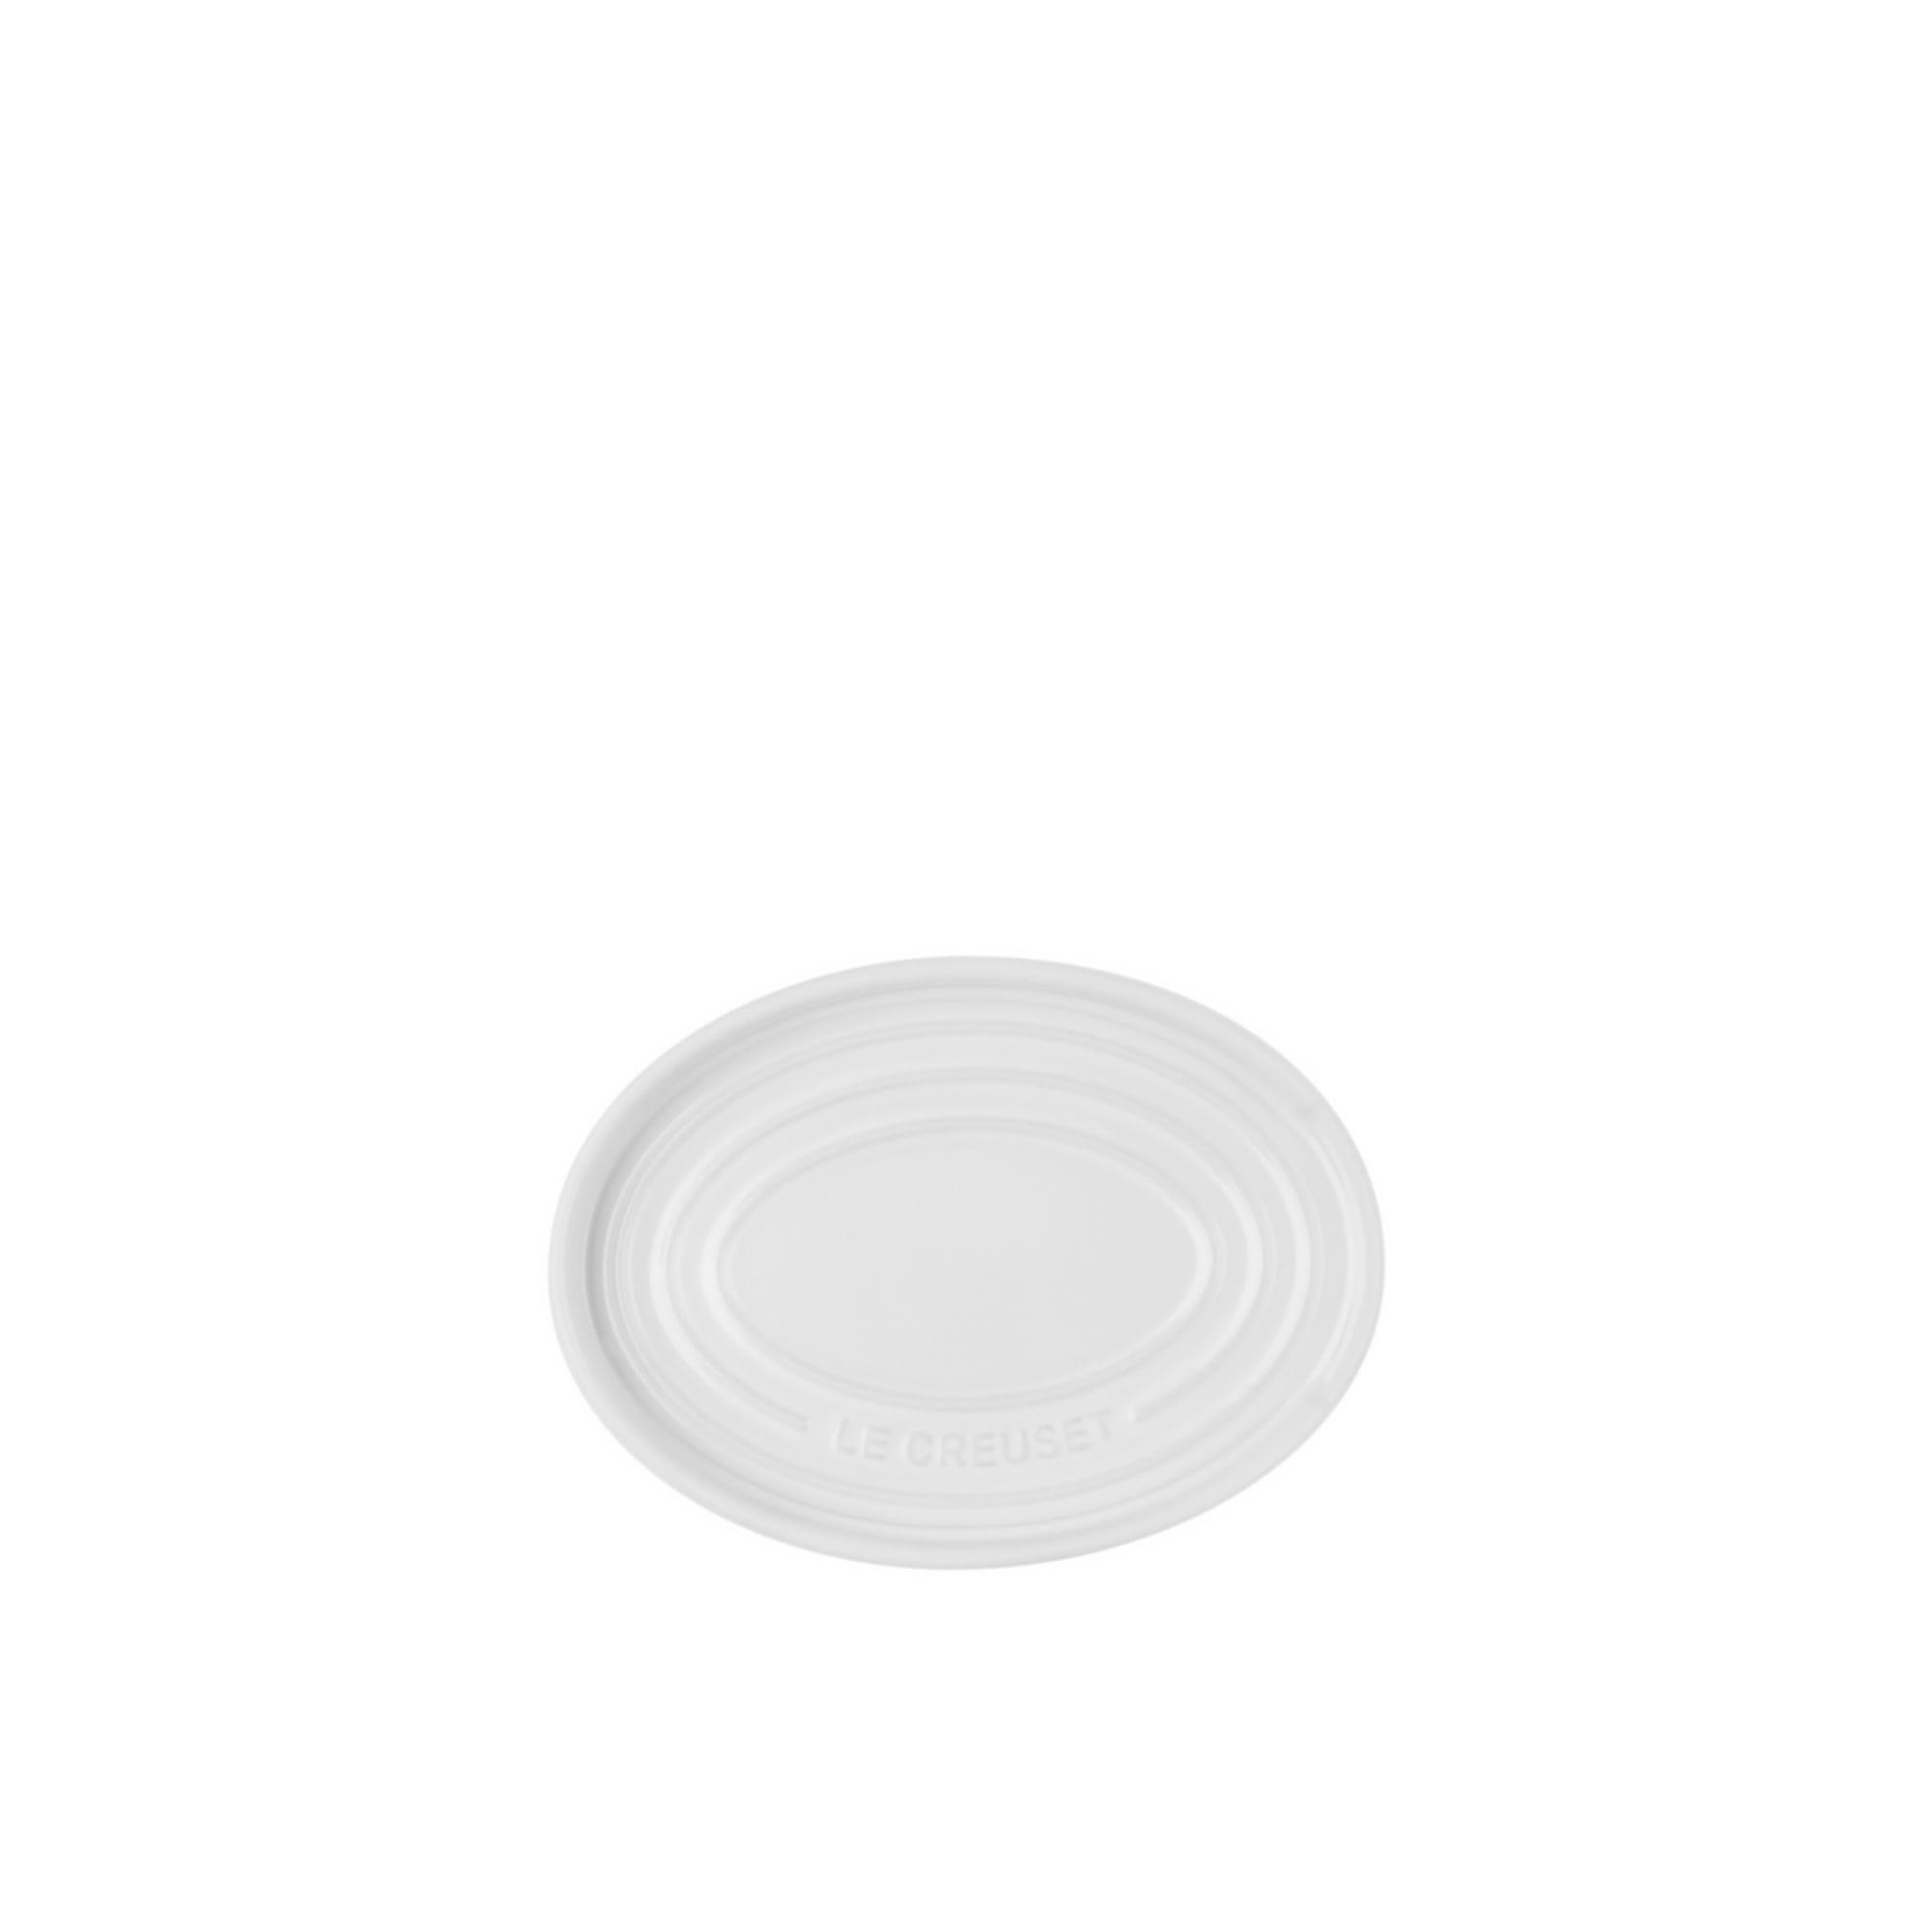 Le Creuset Stoneware Oval Spoon Rest White Image 4